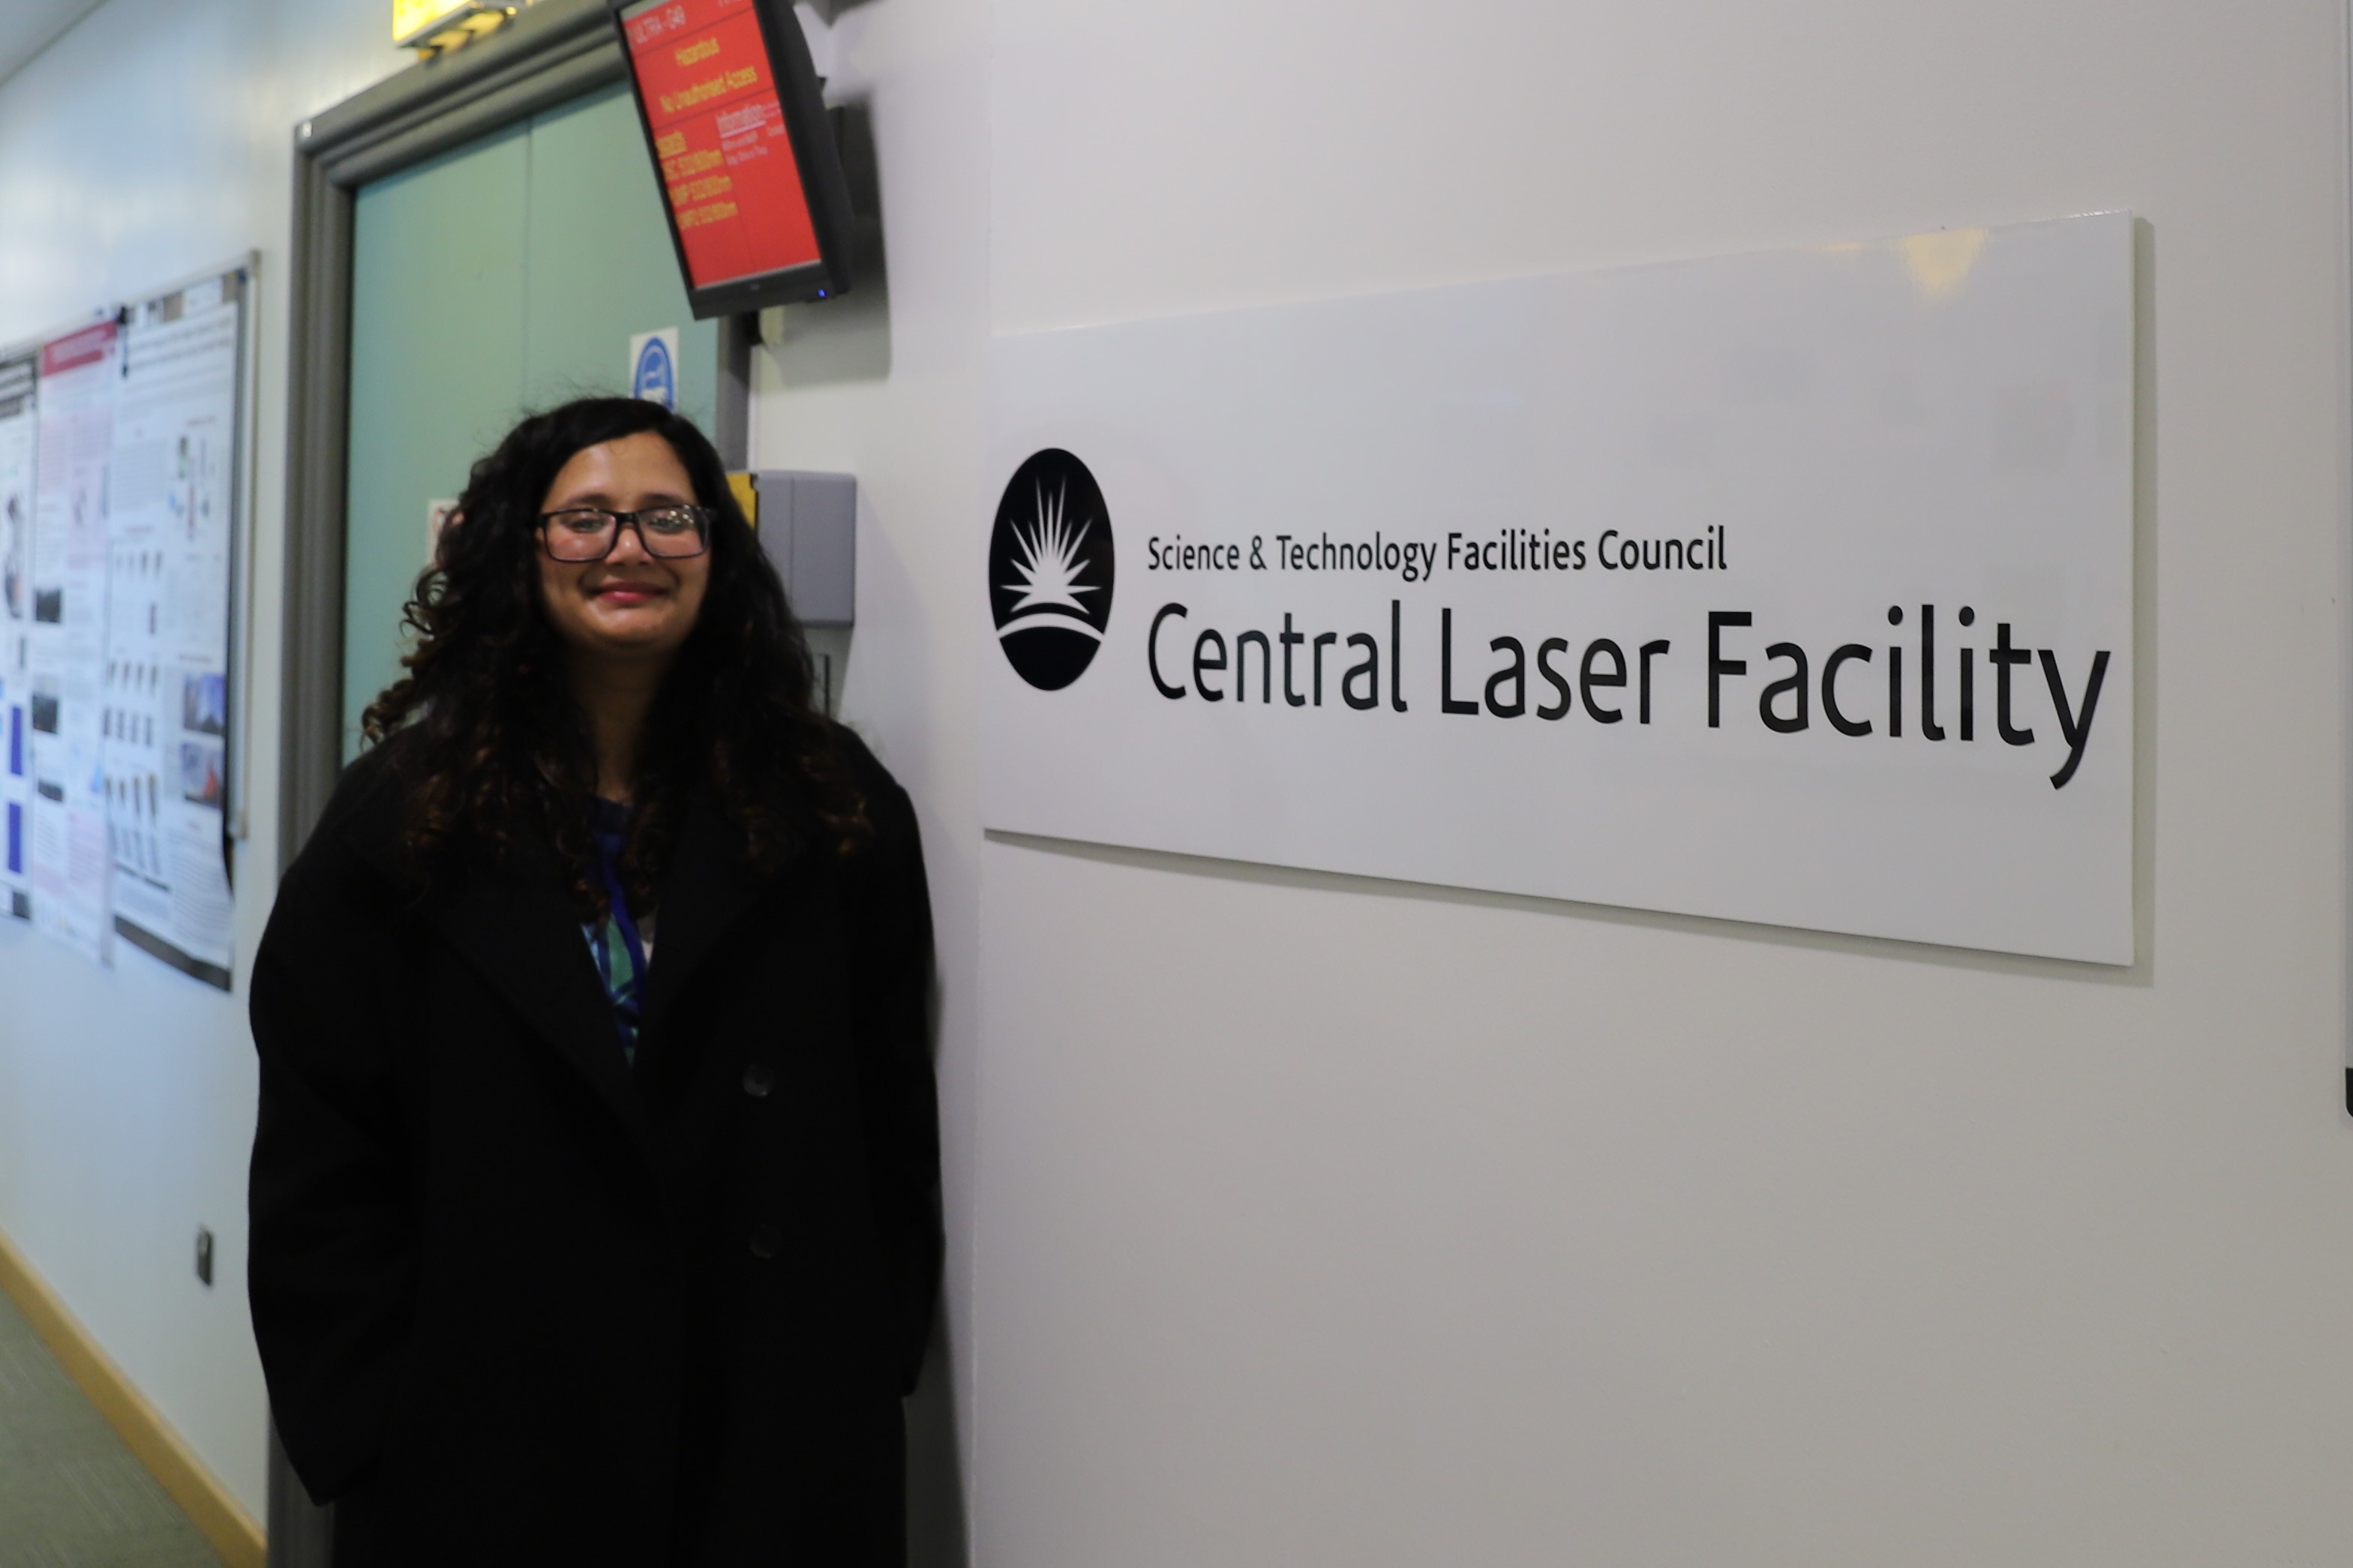 Sneha standing next to a sign that reads "Science and Technology Facilities Council Central Laser Facility".